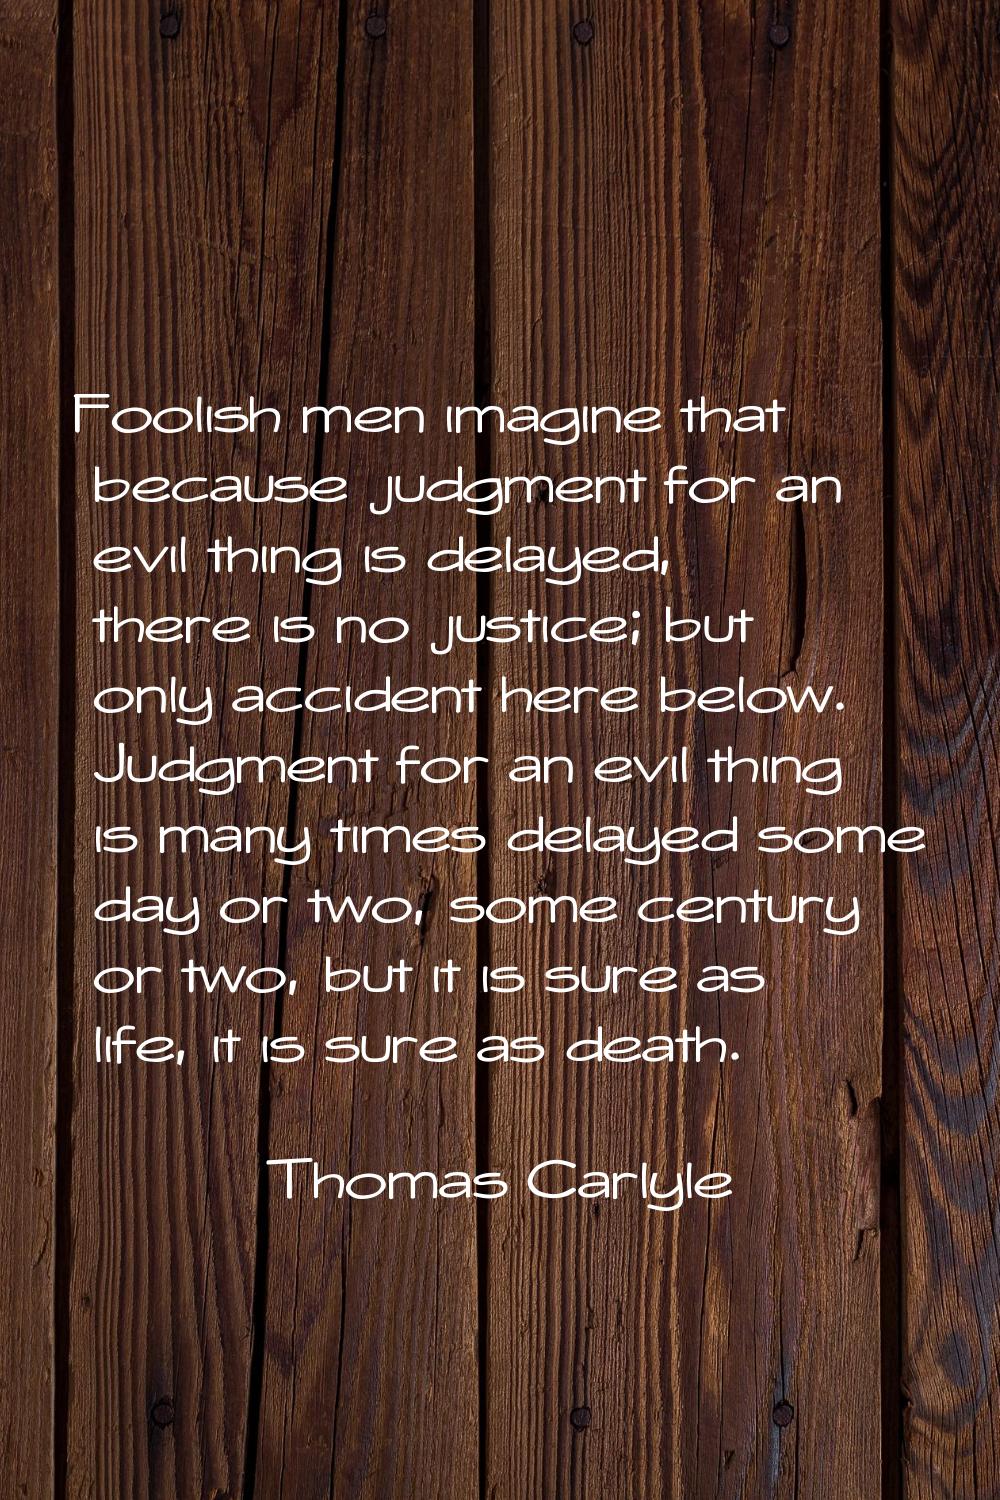 Foolish men imagine that because judgment for an evil thing is delayed, there is no justice; but on